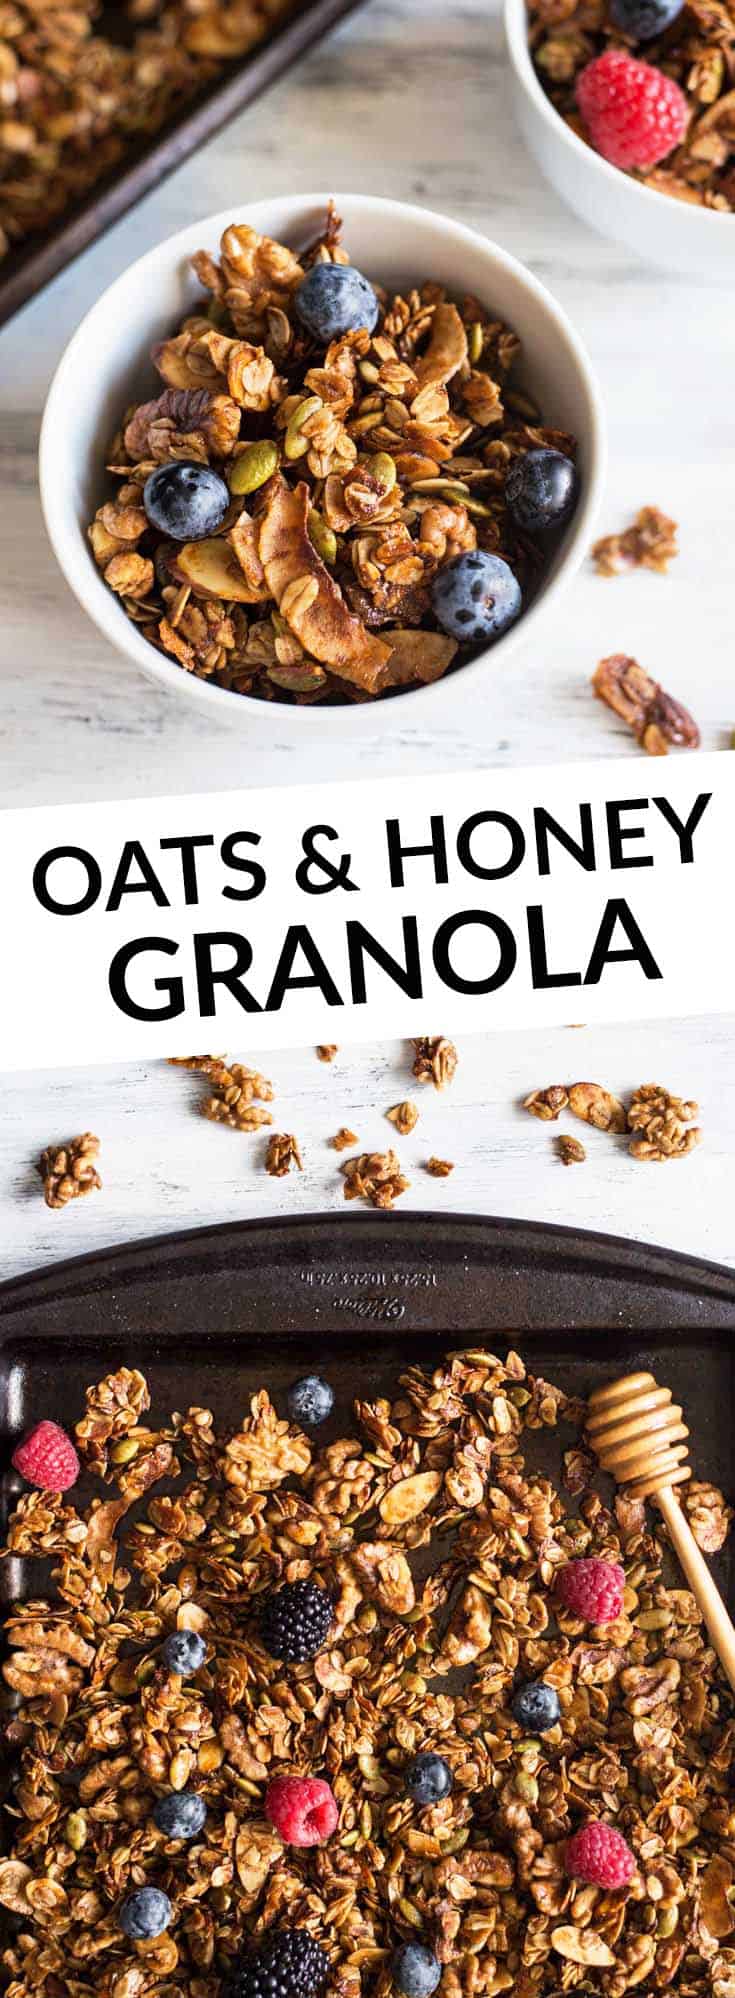 Easy Healthy Granola Recipe with Oats and Honey - gluten free